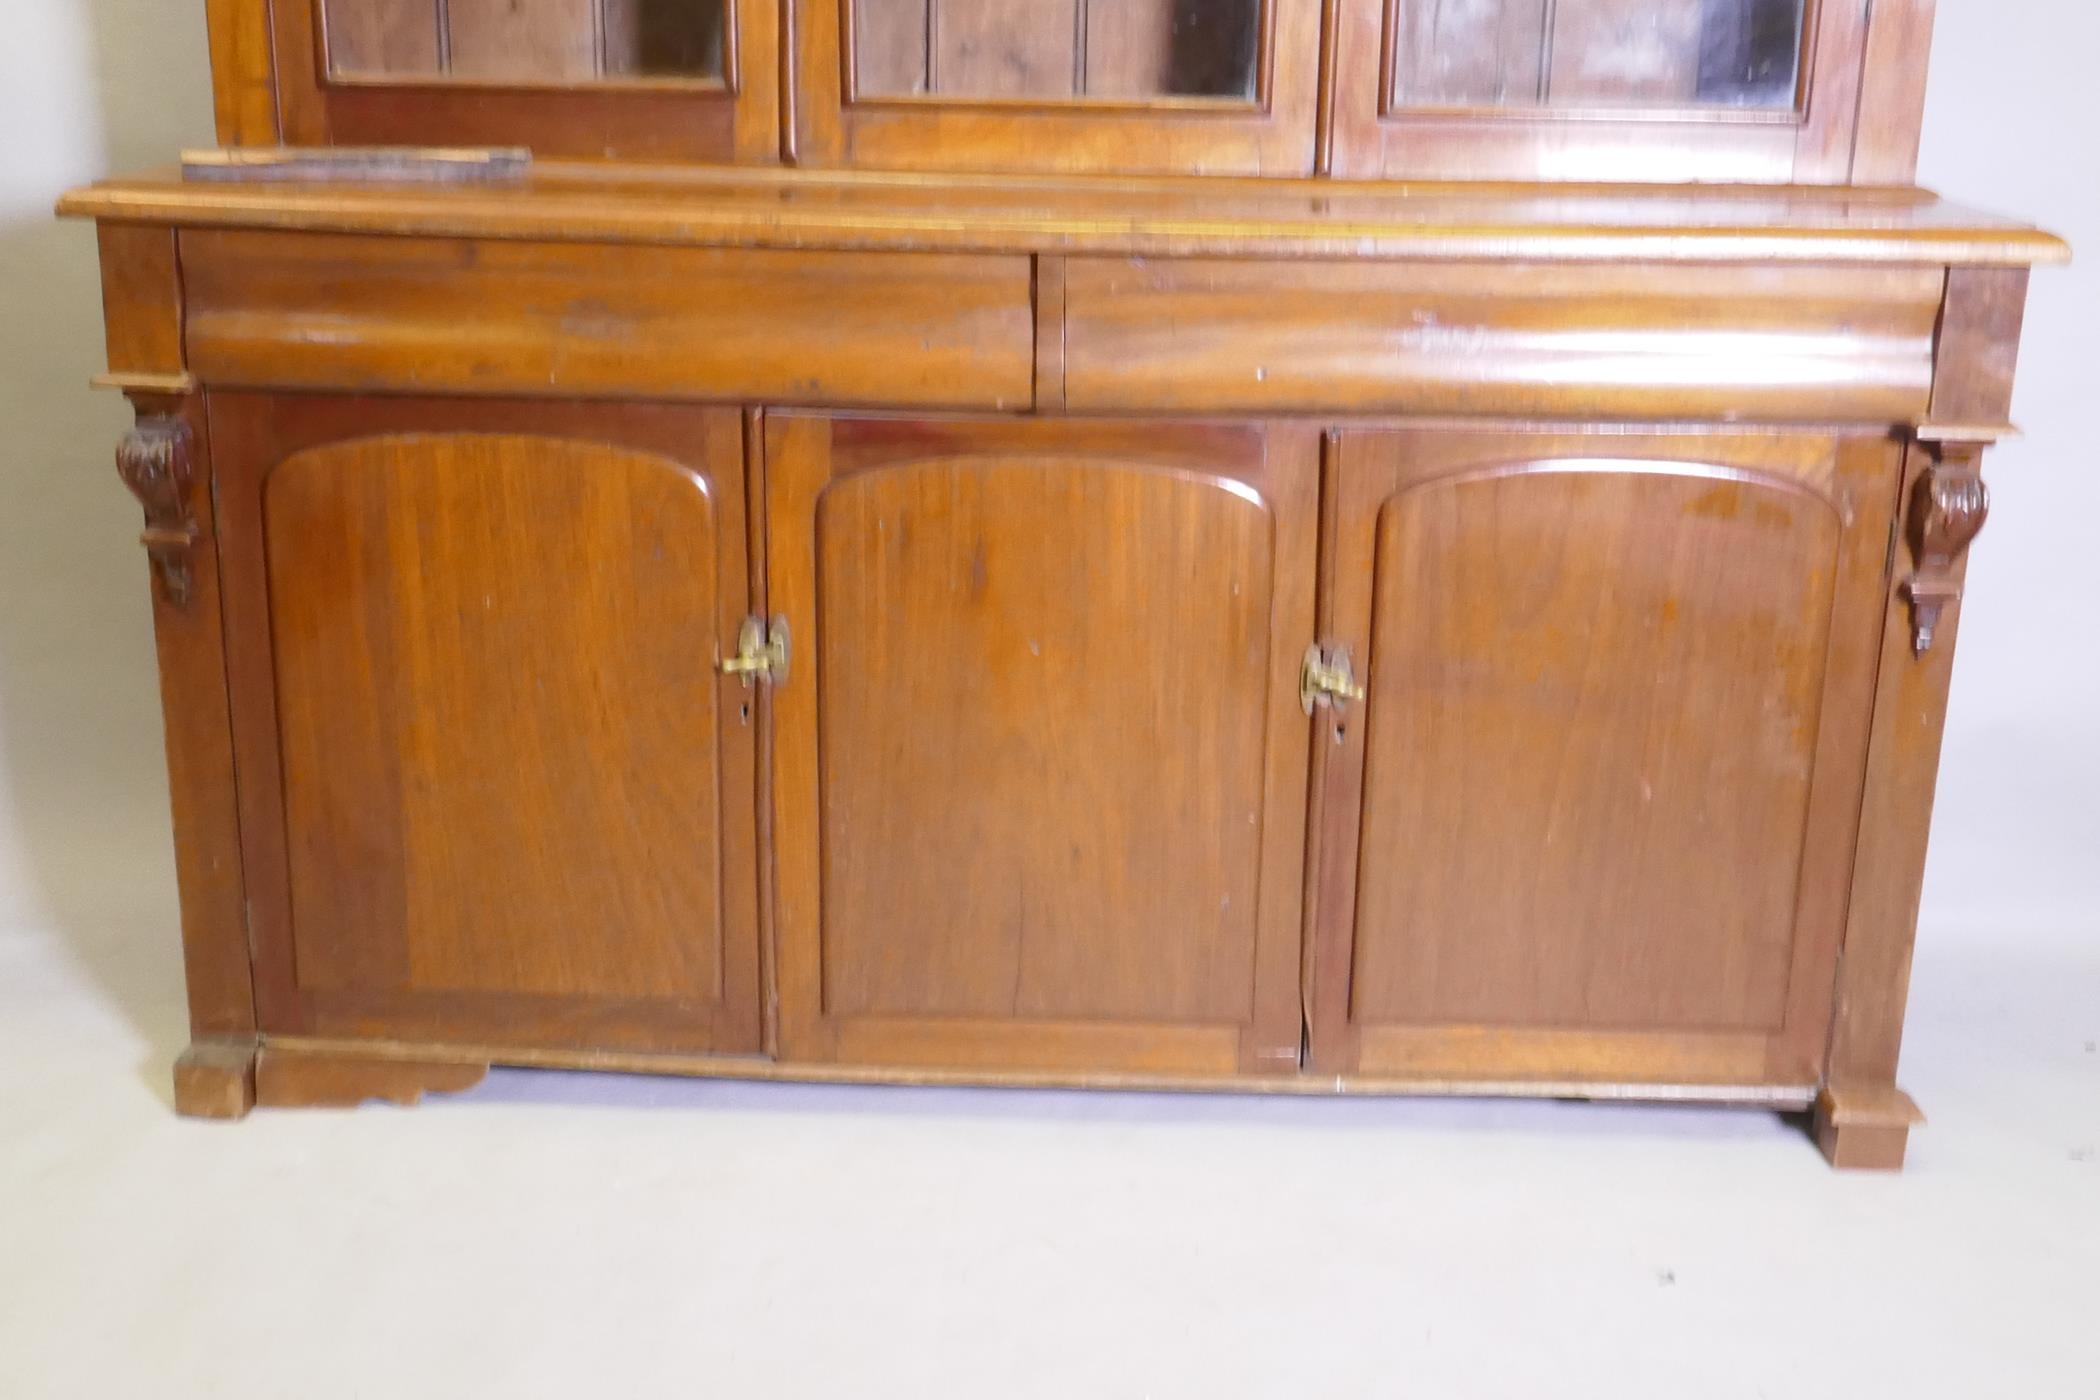 A C19th French stained fruitwood and walnut bookcase, the upper section with two glazed doors, - Image 2 of 4